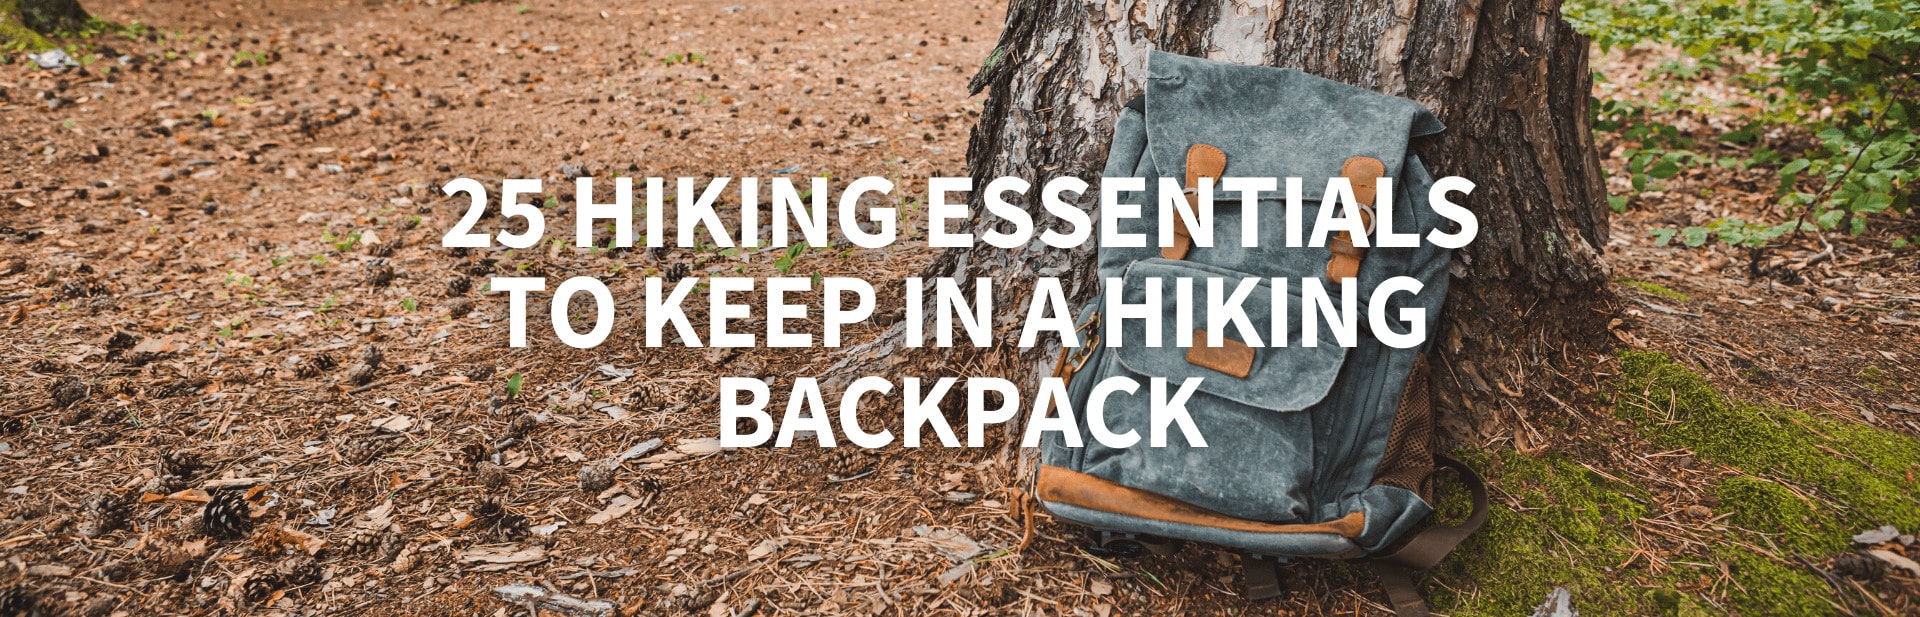 What to Keep in a Hiking Backpack: 25 Essential Pieces of Gear